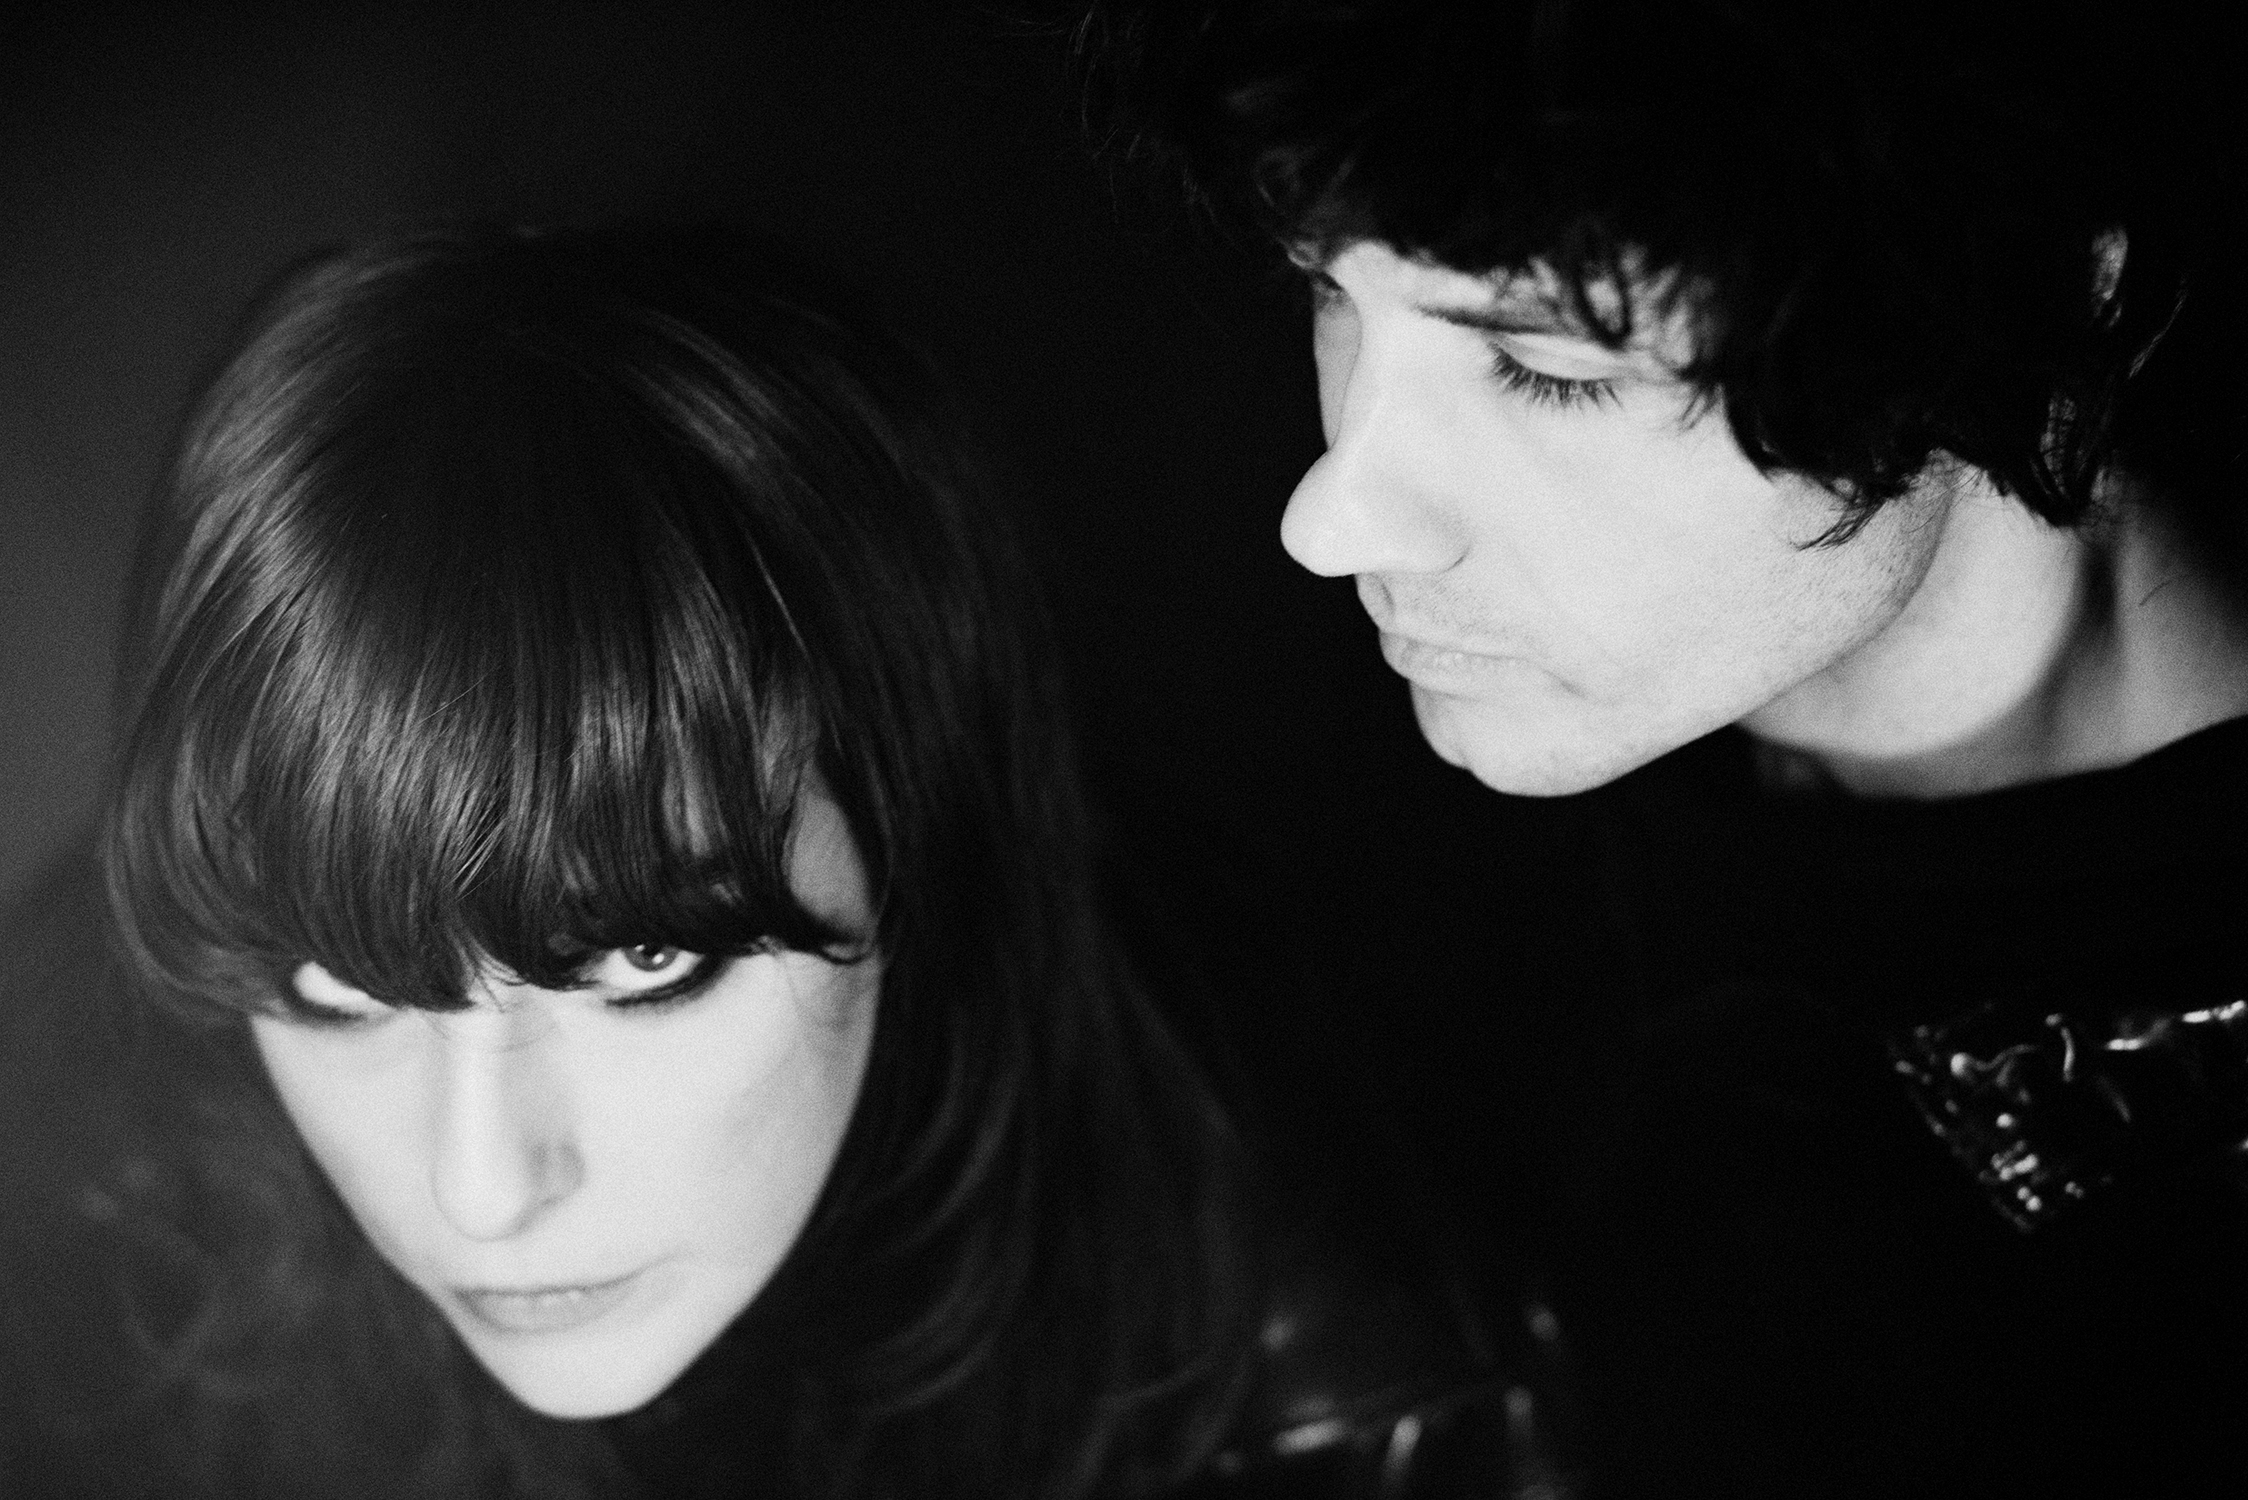 Beach House have released their new concert film Live at Kings Theatre